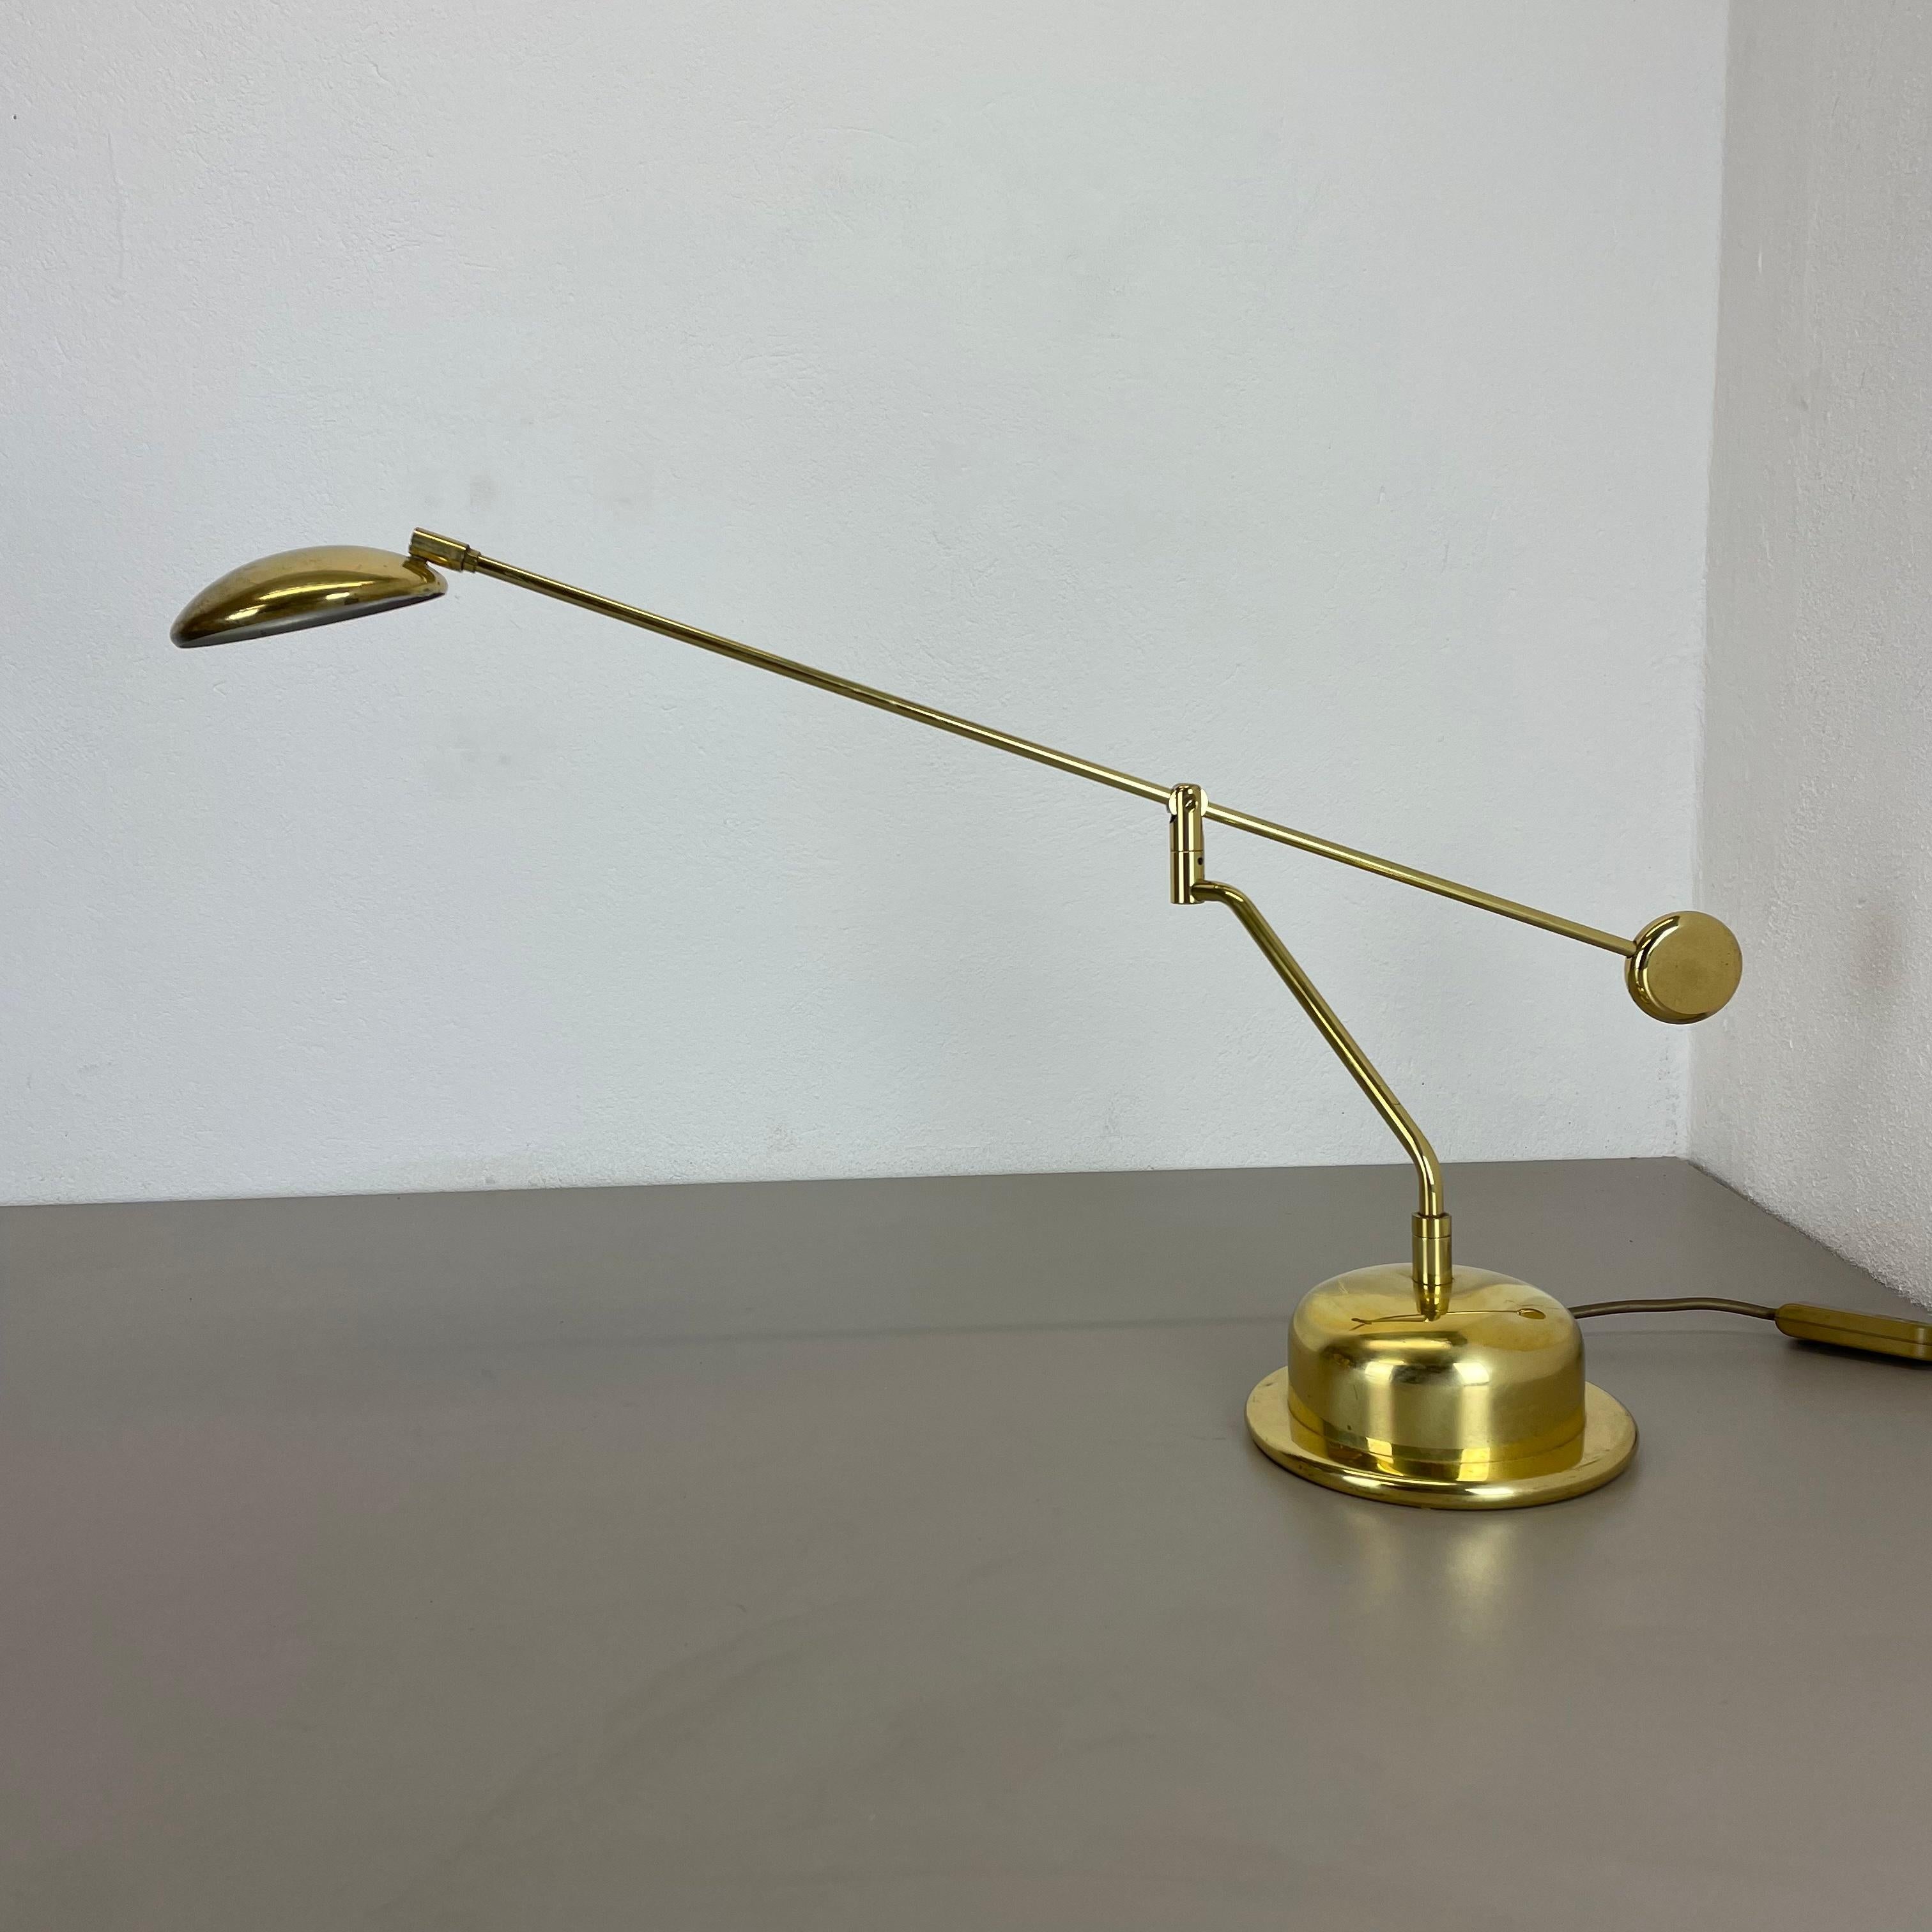 Article:
Table light with swing arm
Producer:
Bankamp Leuchten, Germany
Origin:
Germany in the manner of Stilnovo and Sciolari
Age:
1980s
This modernist table light was produced in Germany in the 1980s by Bankamp Leuchten. It is made from solid